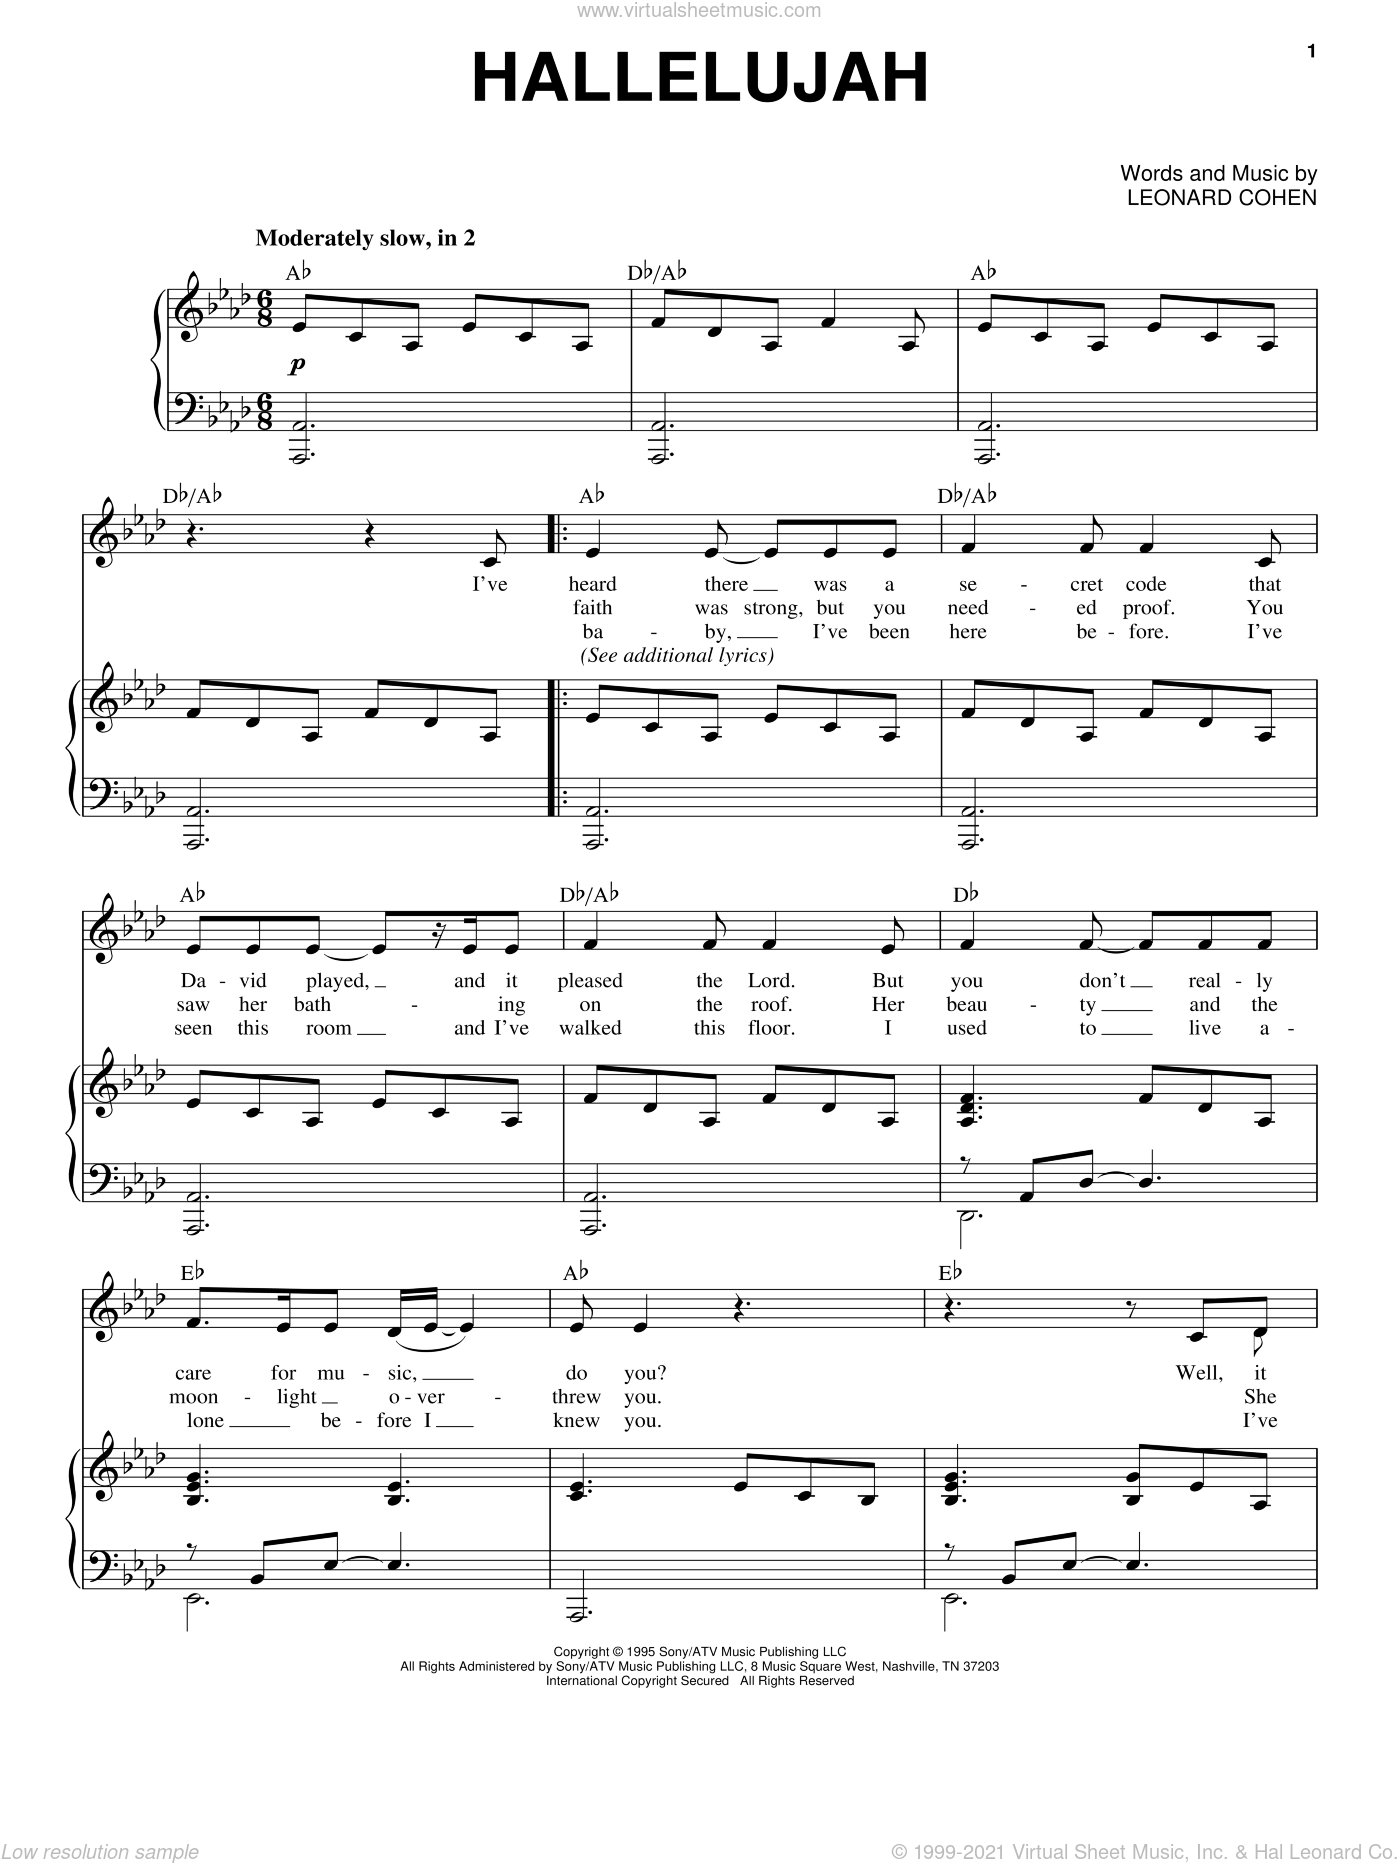 Crowe - Hallelujah sheet music for voice and piano (PDF) .